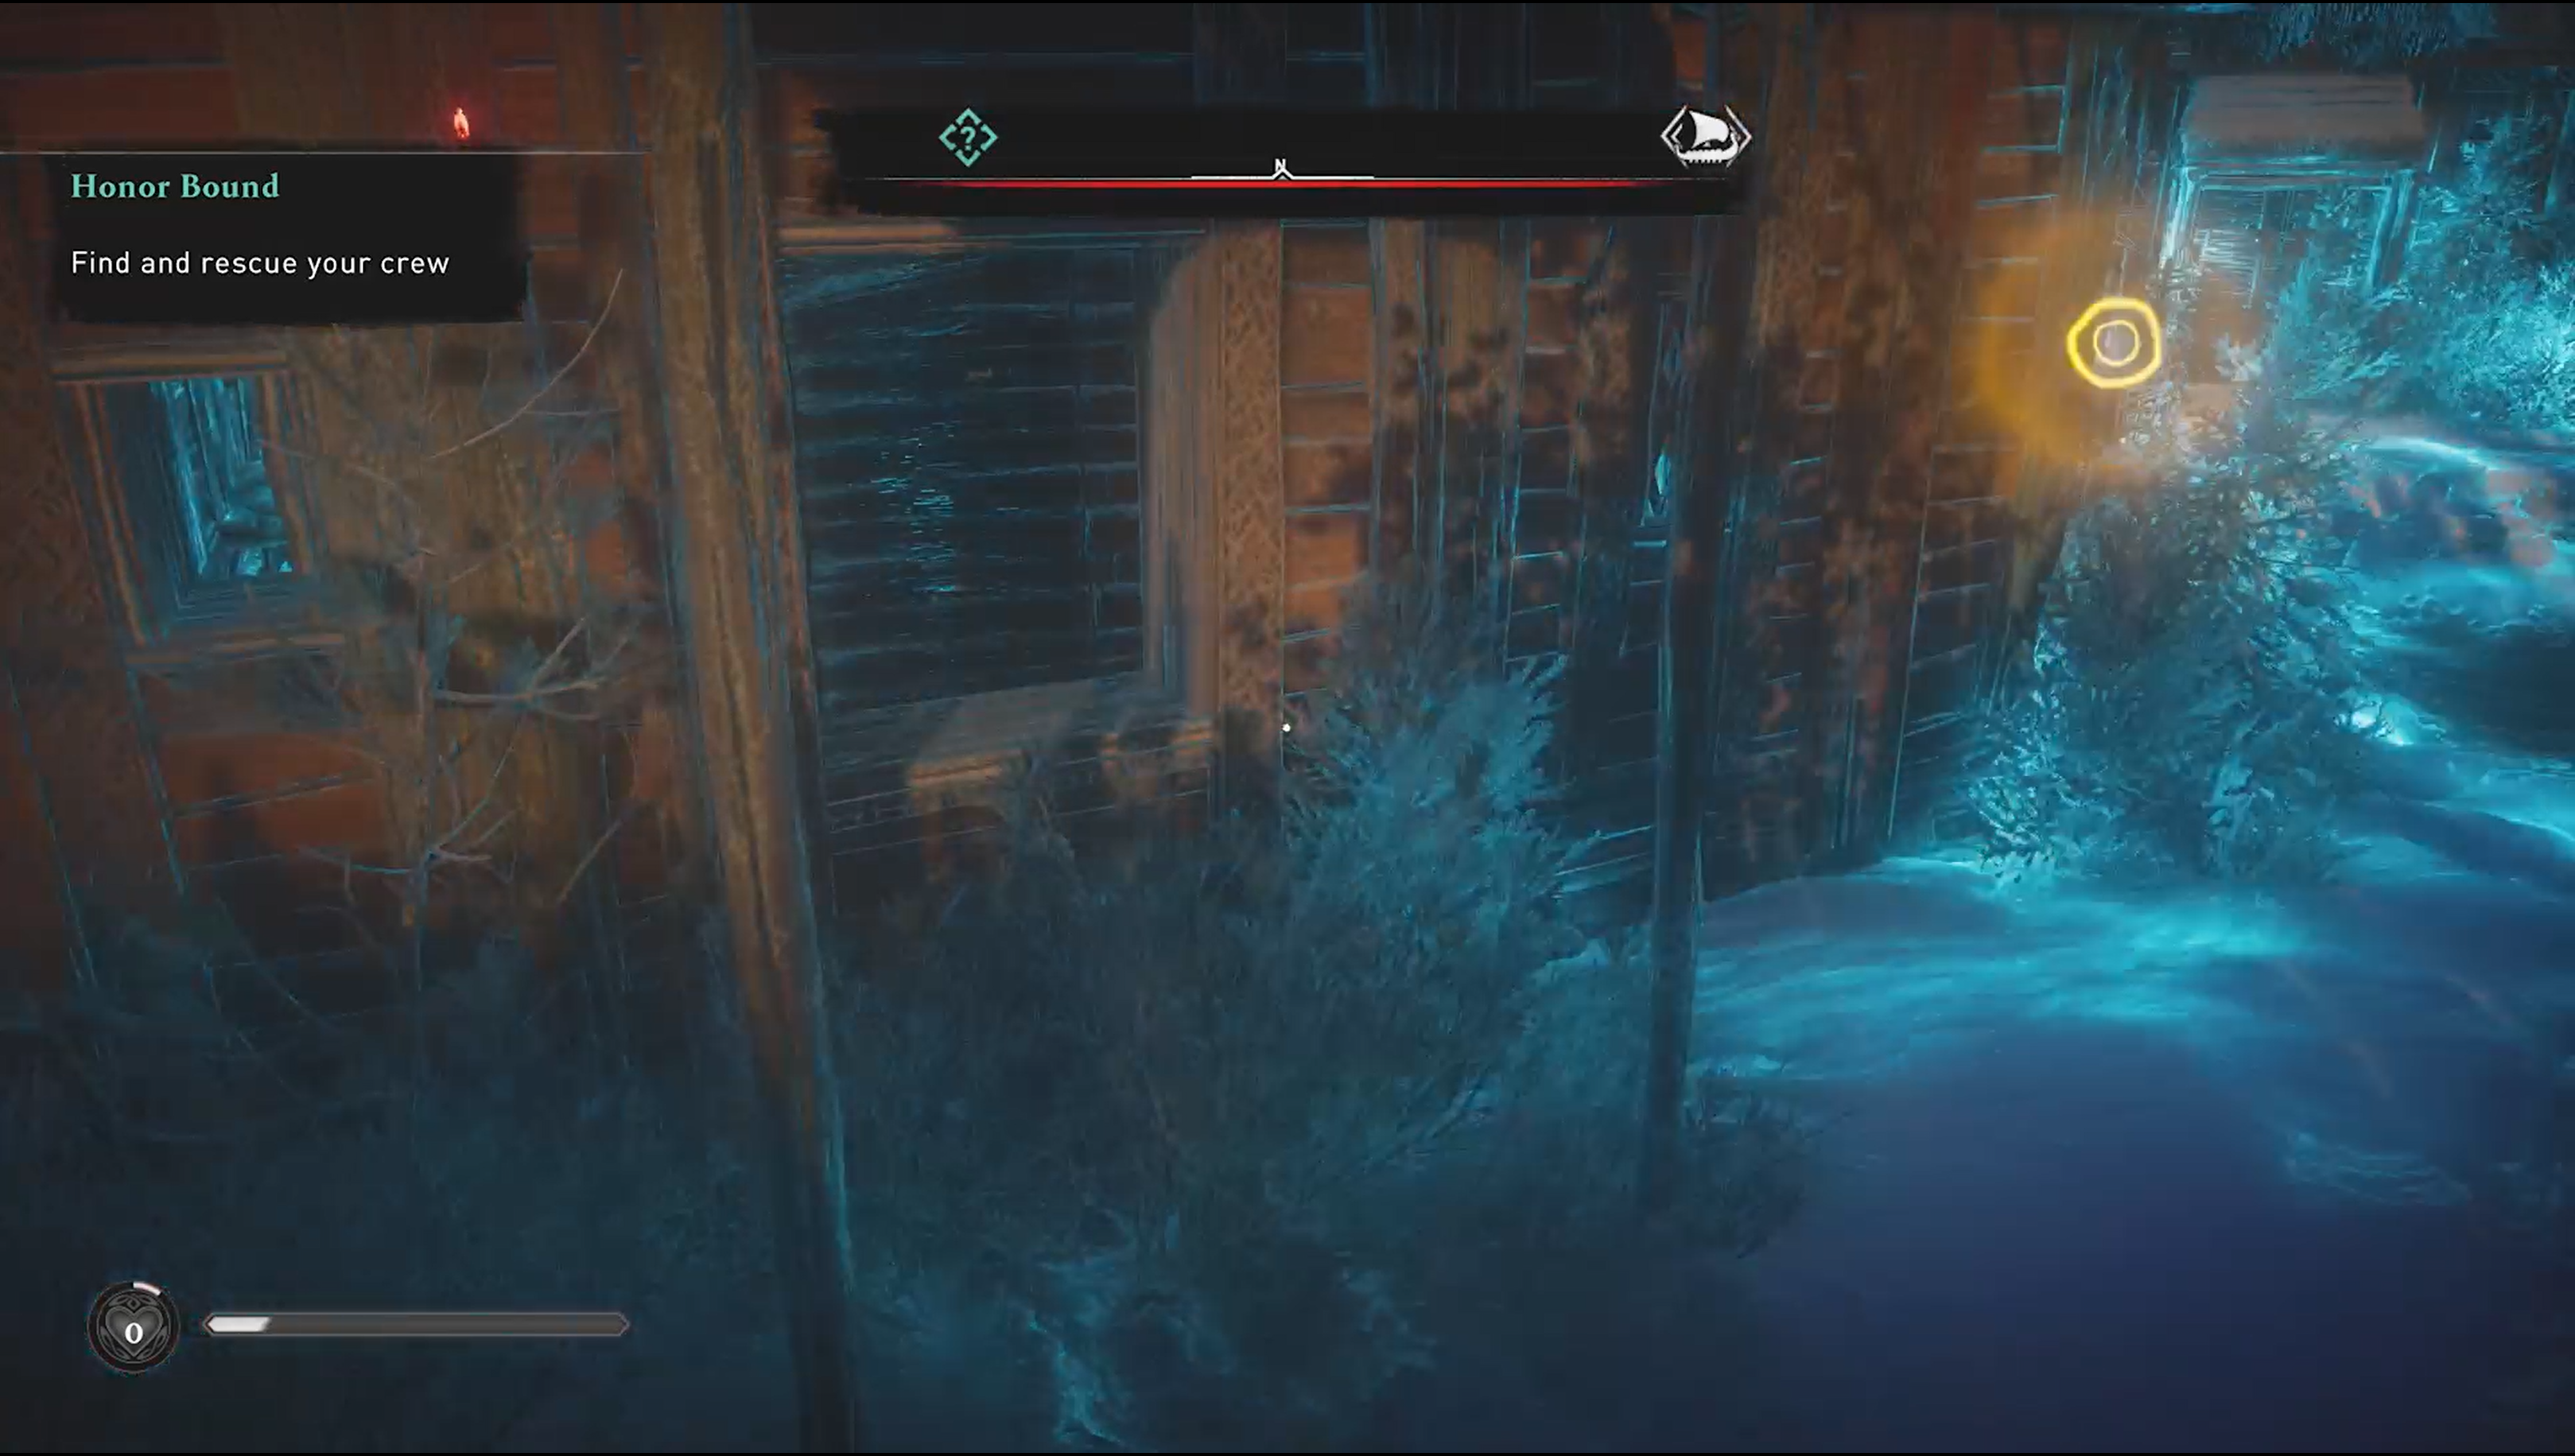 Assassin's Creed Valhalla screenshot of "Odin's Sight" ability being used showing glowing bright yellow rings from around a cabin's corner indicating something the player can interact with.